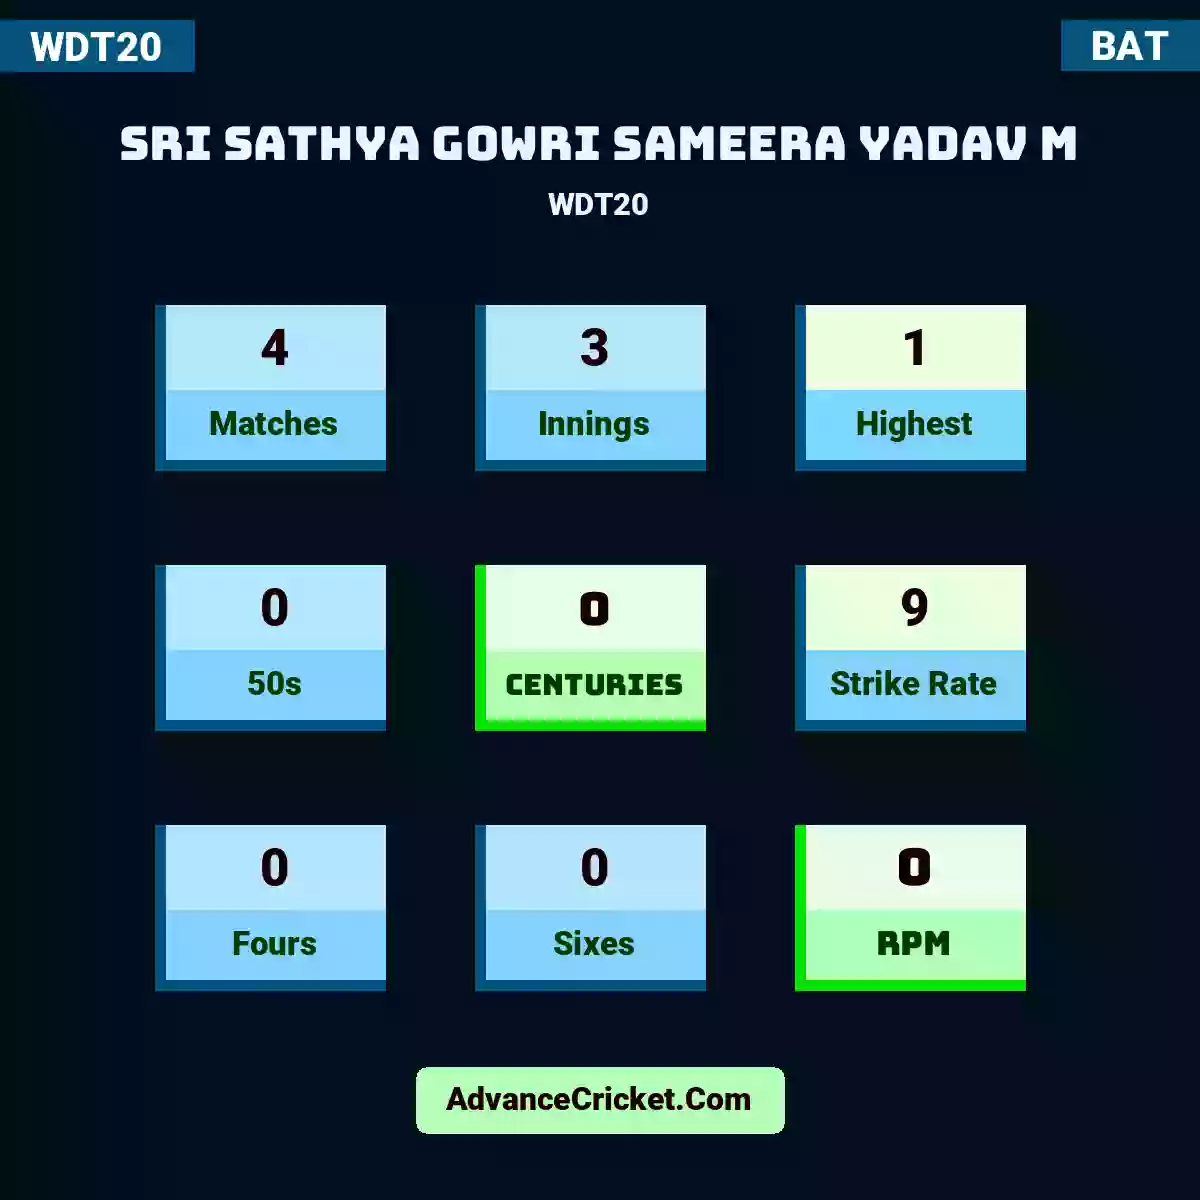 Sri Sathya Gowri Sameera Yadav M WDT20 , Sri Sathya Gowri Sameera Yadav M played 4 matches, scored 1 runs as highest, 0 half-centuries, and 0 centuries, with a strike rate of 9. S.Sathya.Gowri.Sameera.Yadav.M hit 0 fours and 0 sixes, with an RPM of 0.